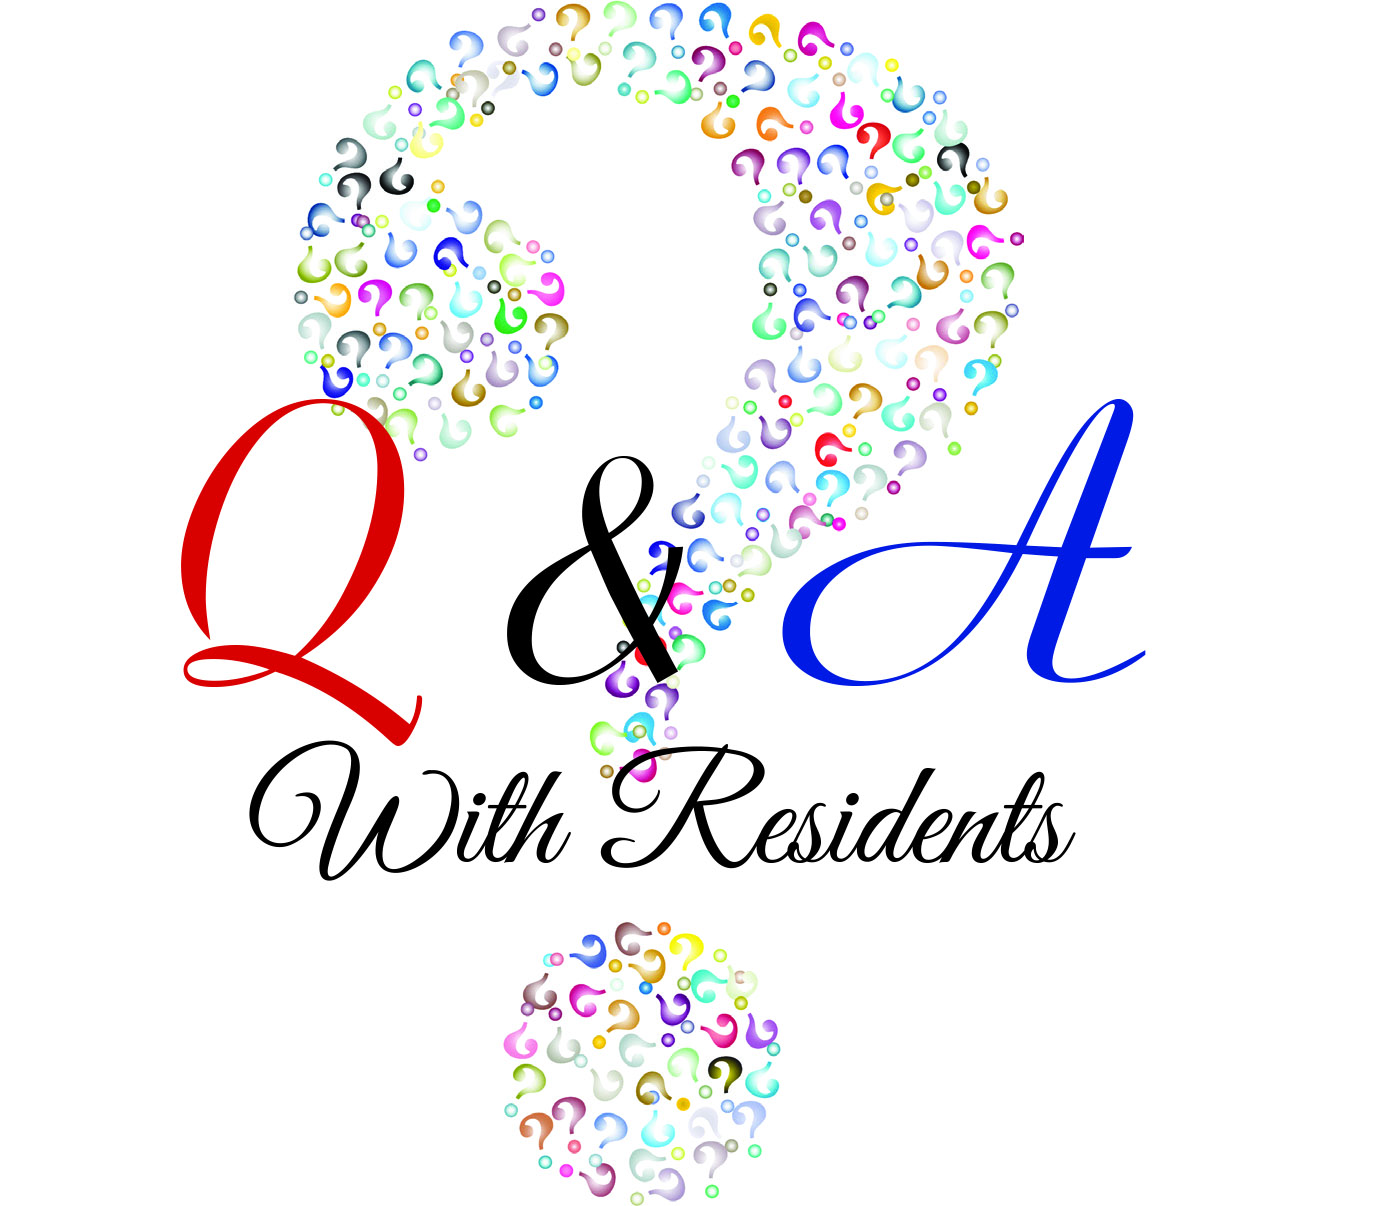 Q&A With Residents